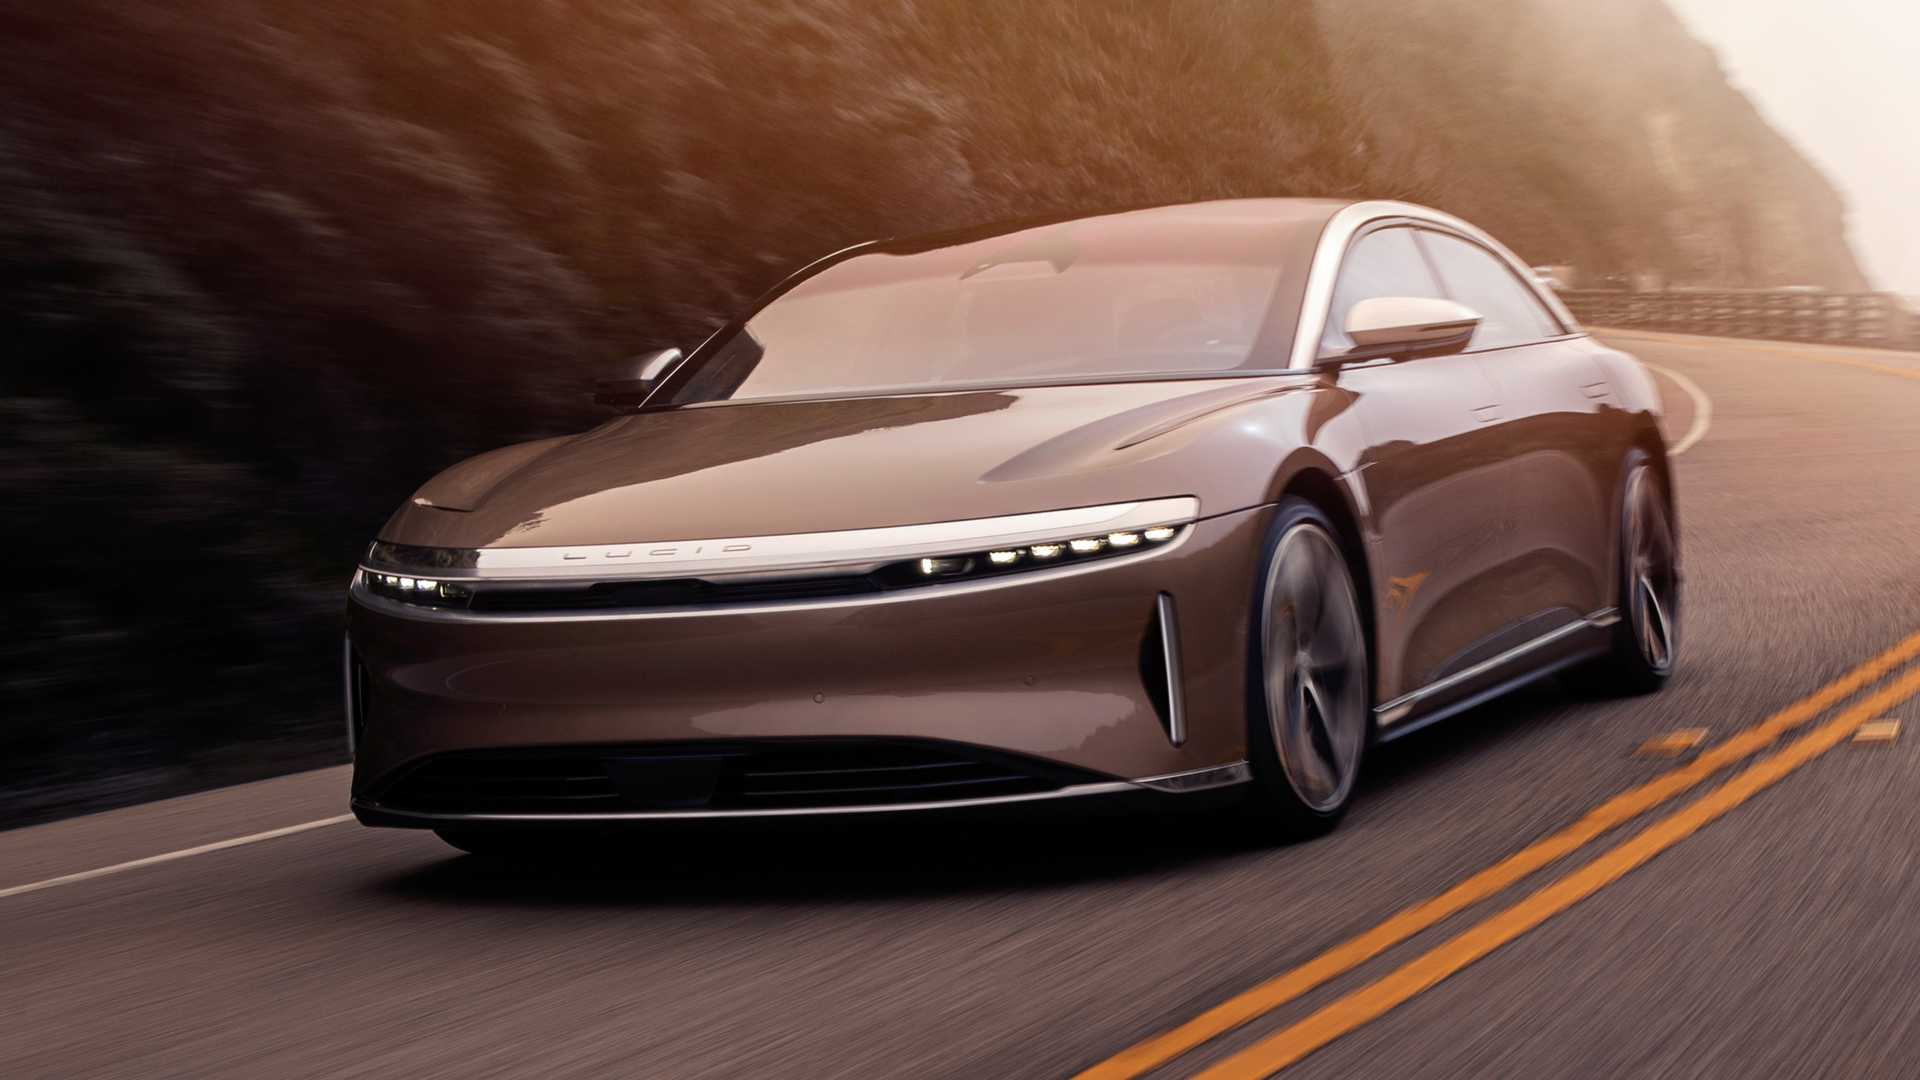 Lucid Air charging speed prediction: Only 20 kW can be reached after 80% battery level?